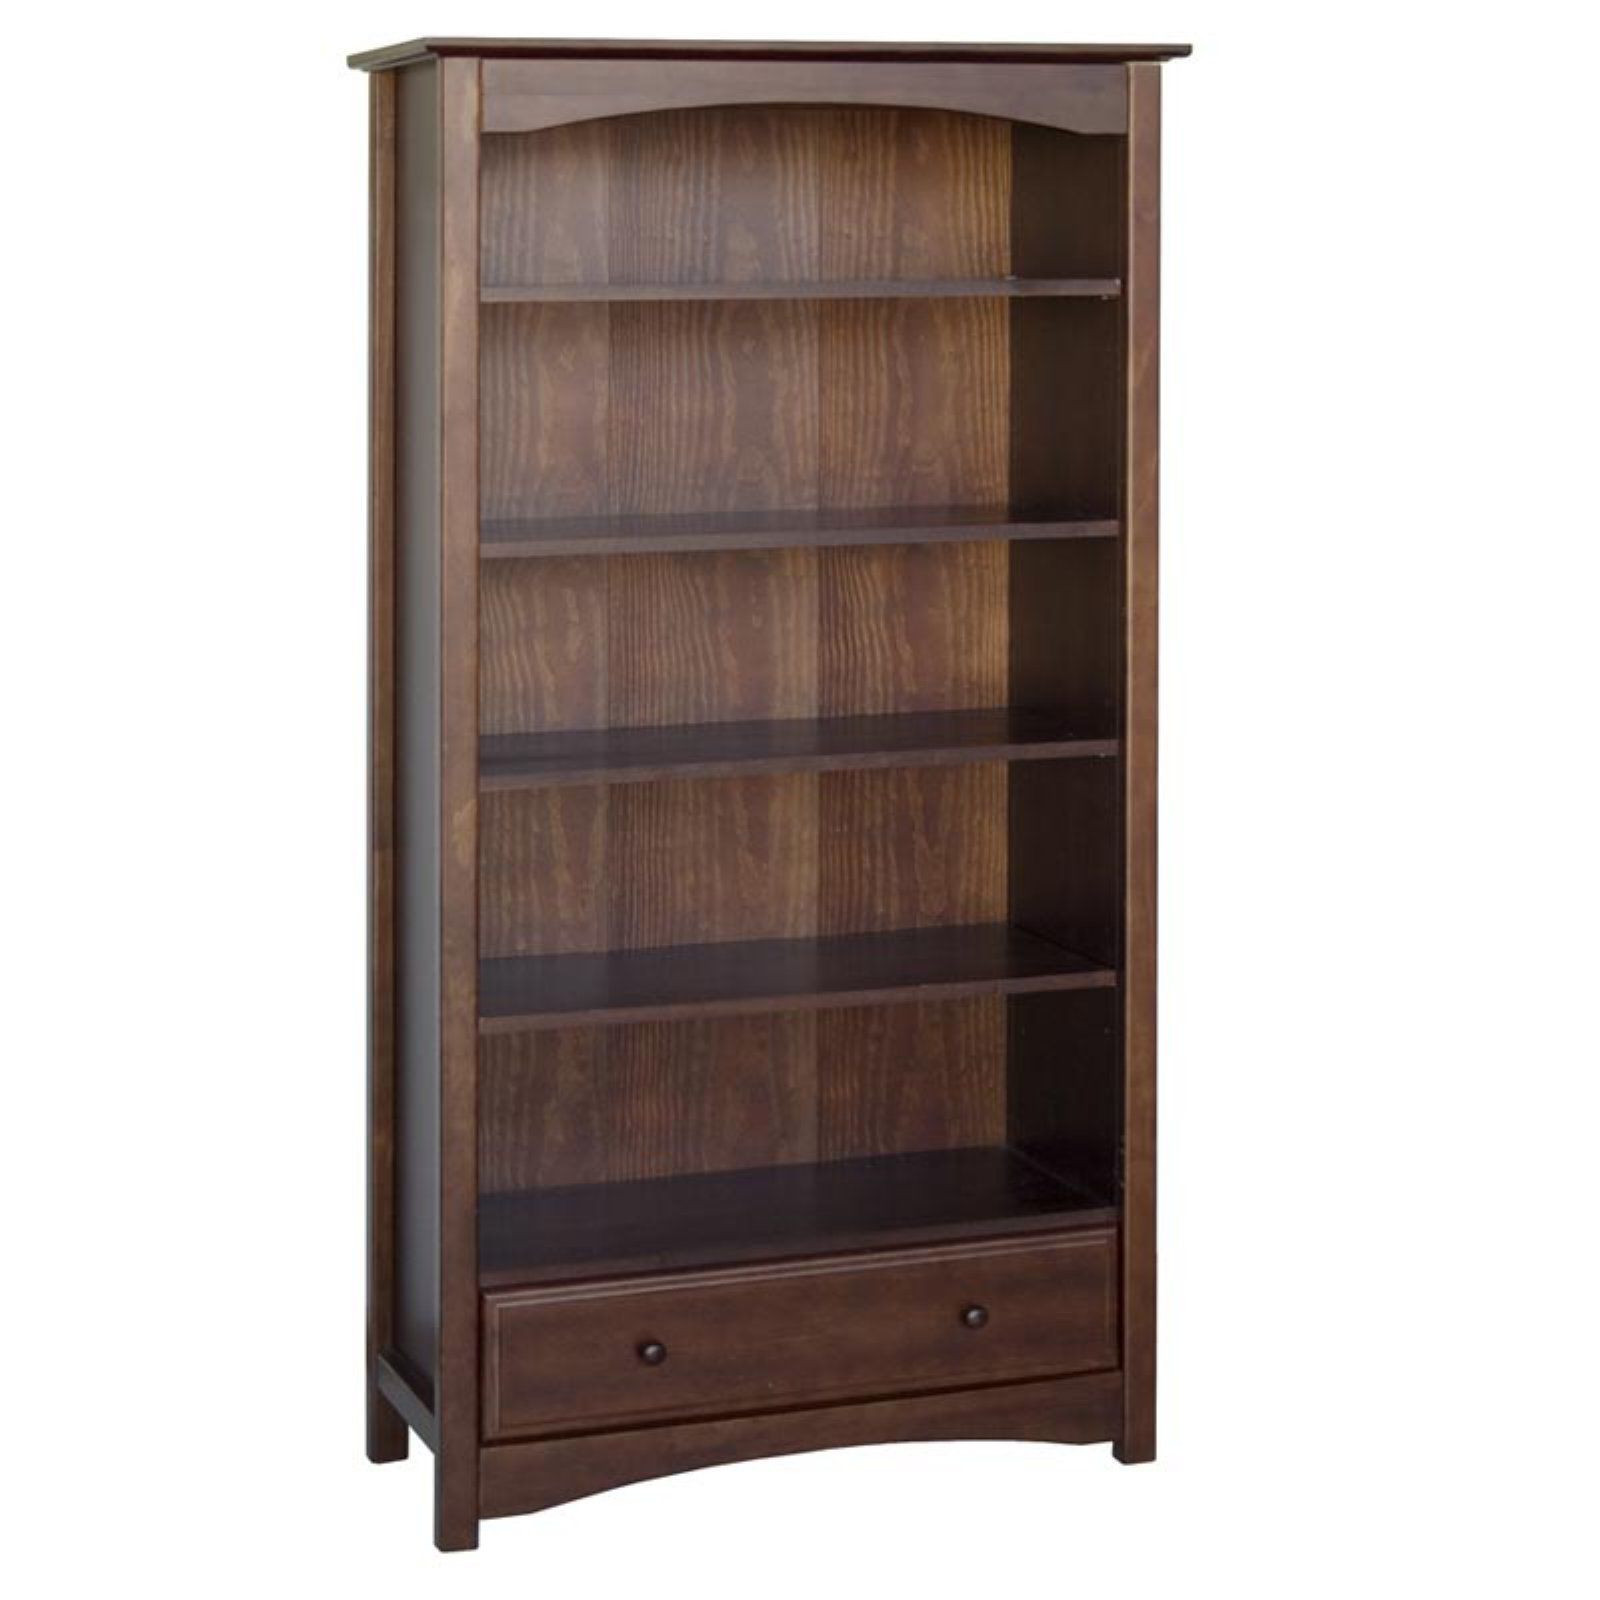 Well Liked Davinci Mdb Wood Bookcase With Drawer Espresso In 2019 With Mdb Standard Bookcases (View 3 of 20)